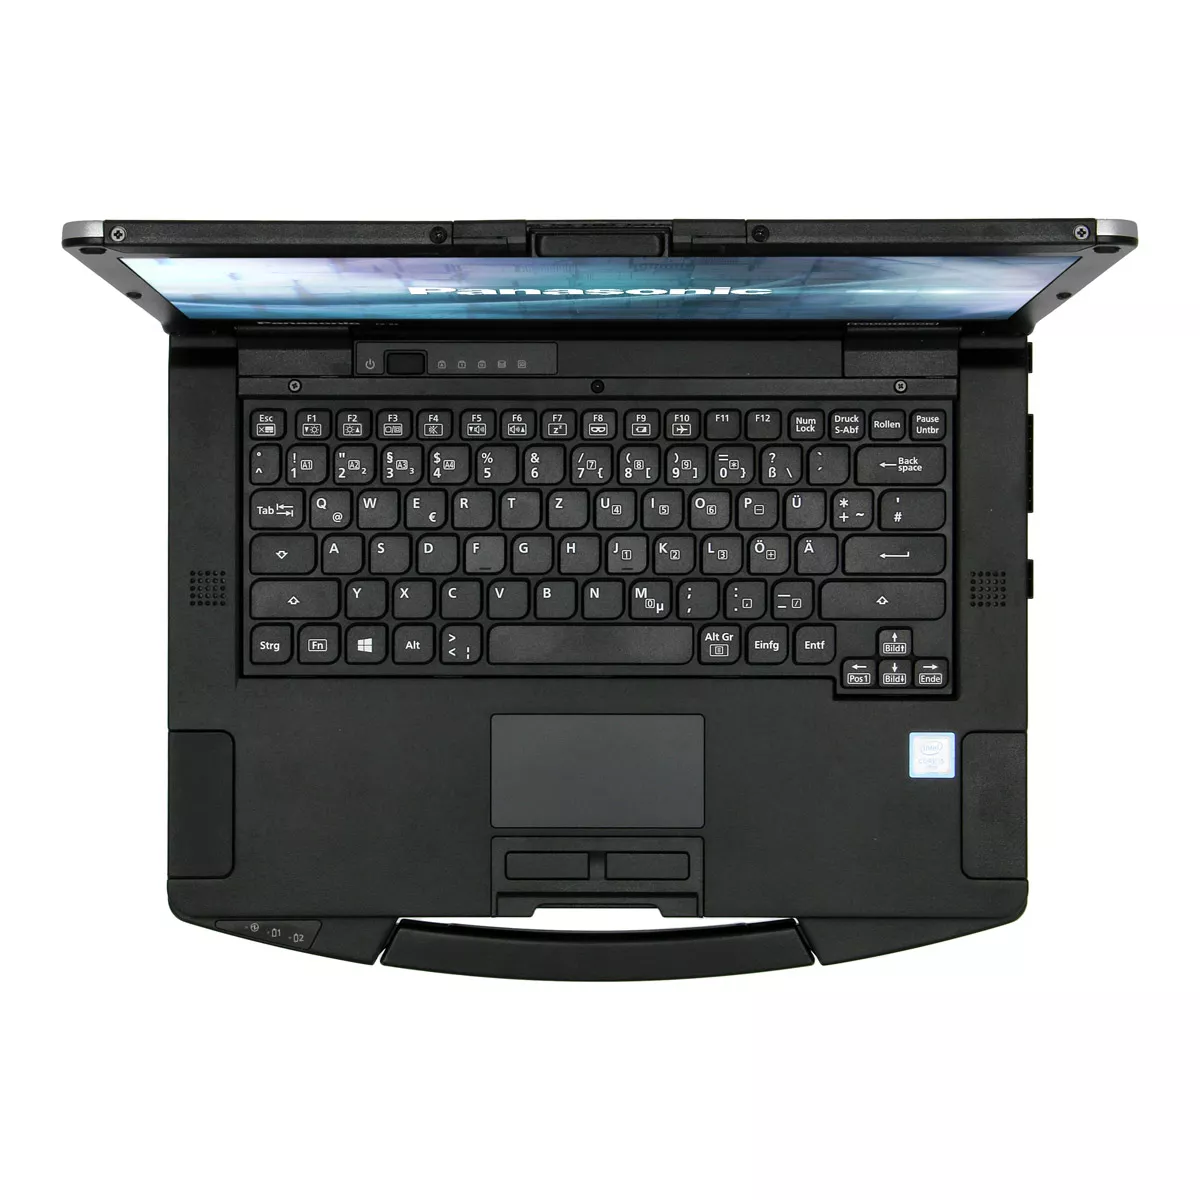 Outdoor Notebook Panasonic Toughbook FZ-55 Core i5 8365U Full-HD 240 GB M.2 SSD Webcam Touch US-Layout A